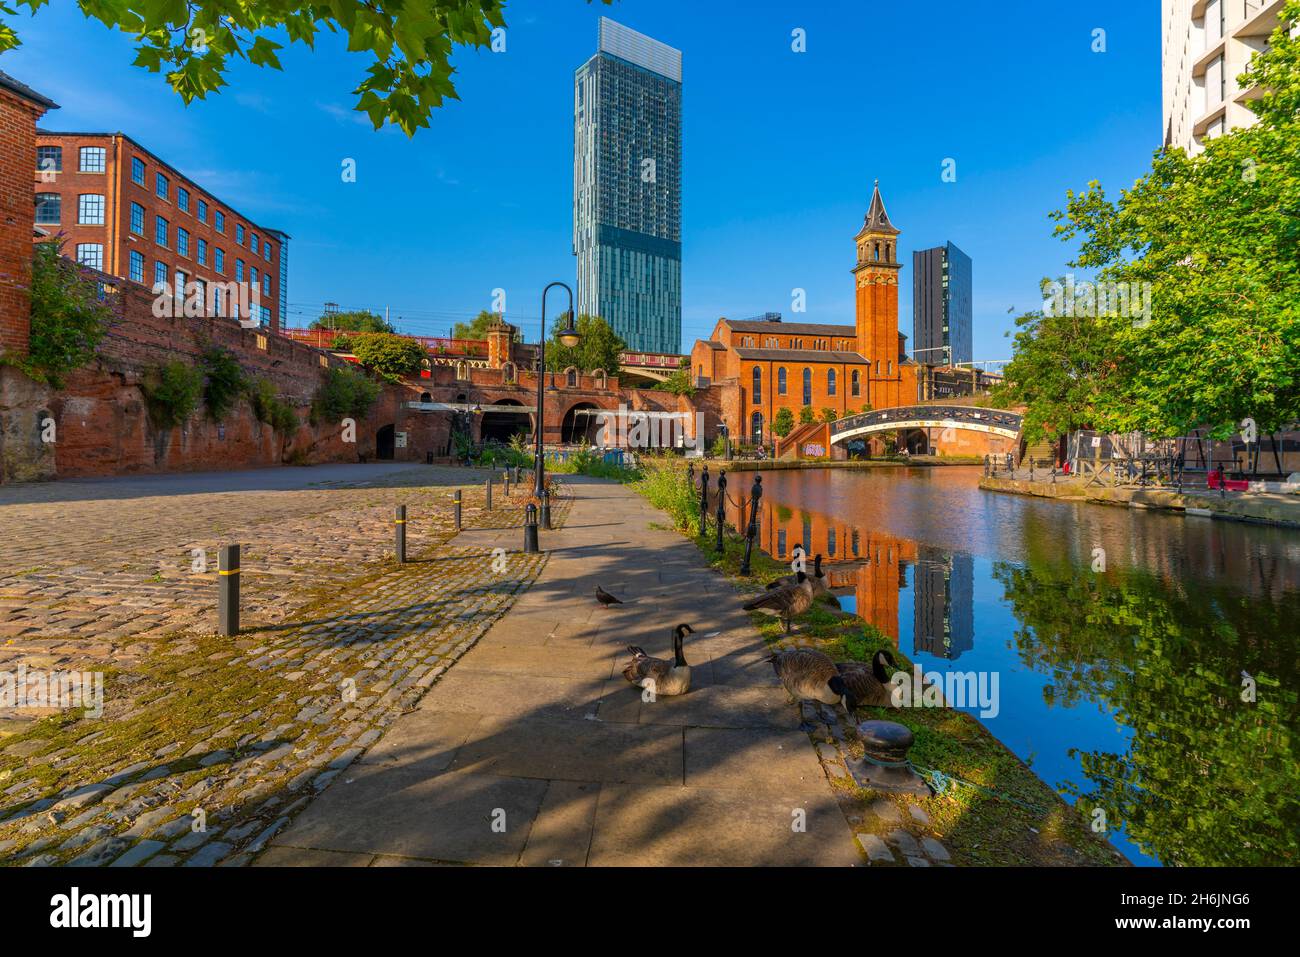 View of 301 Deansgate, St. George's church, Castlefield Canal, Manchester, England, United Kingdom, Europe Stock Photo